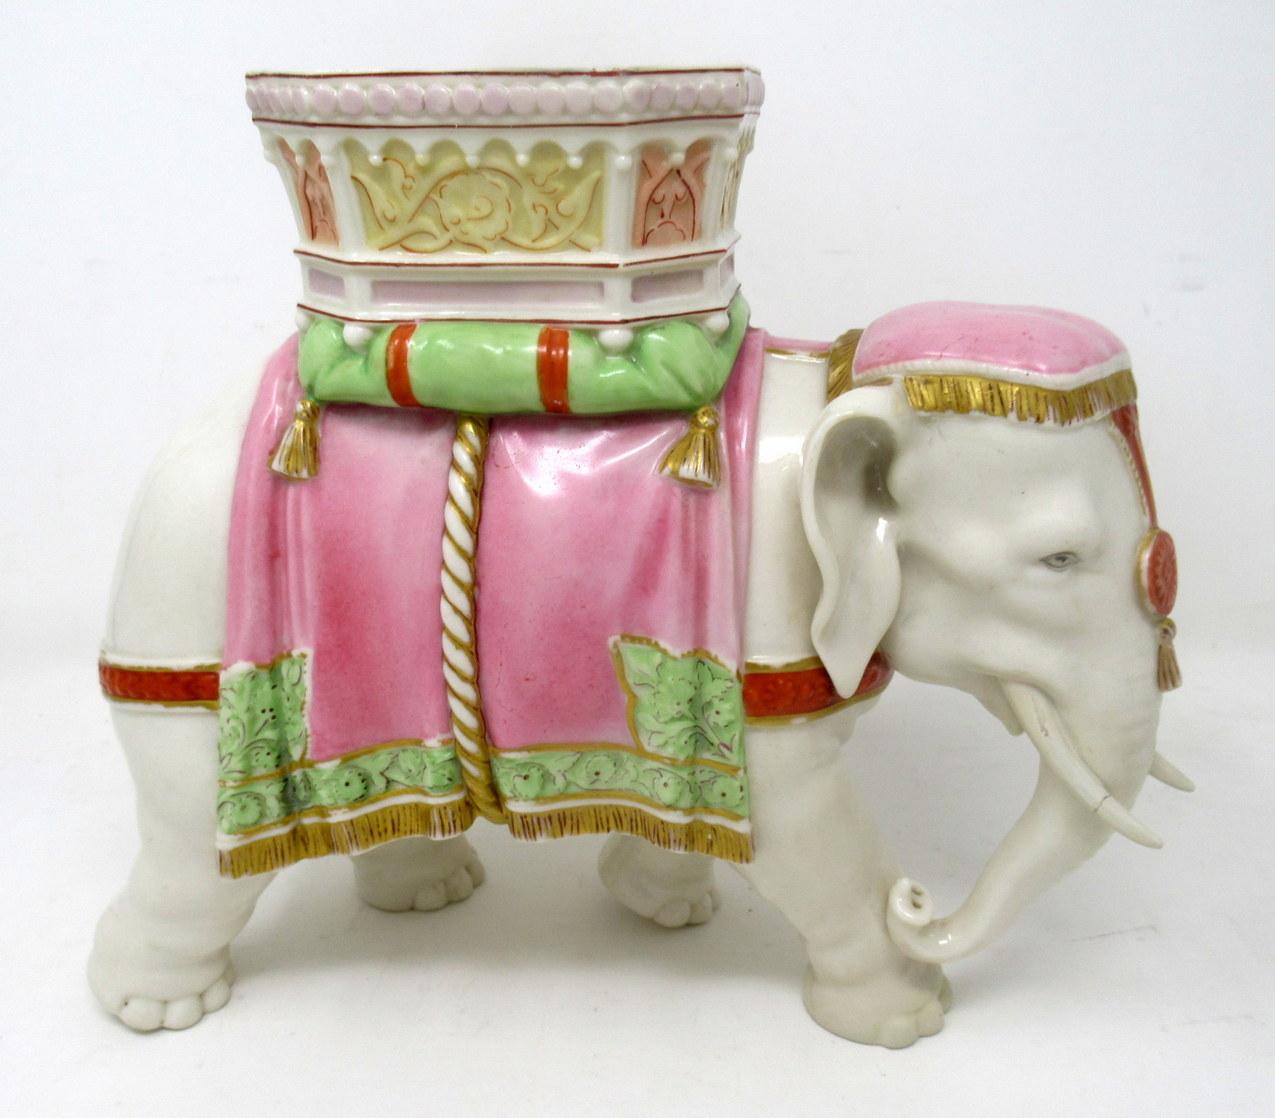 A superb and quite rare example of an English Porcelain Elephant vase made by Kerr and Binns of Royal Worcester. Third quarter of the Nineteenth Century. The off-white body standing upright, decorated in colours of soft pink, terracotta and gilt.